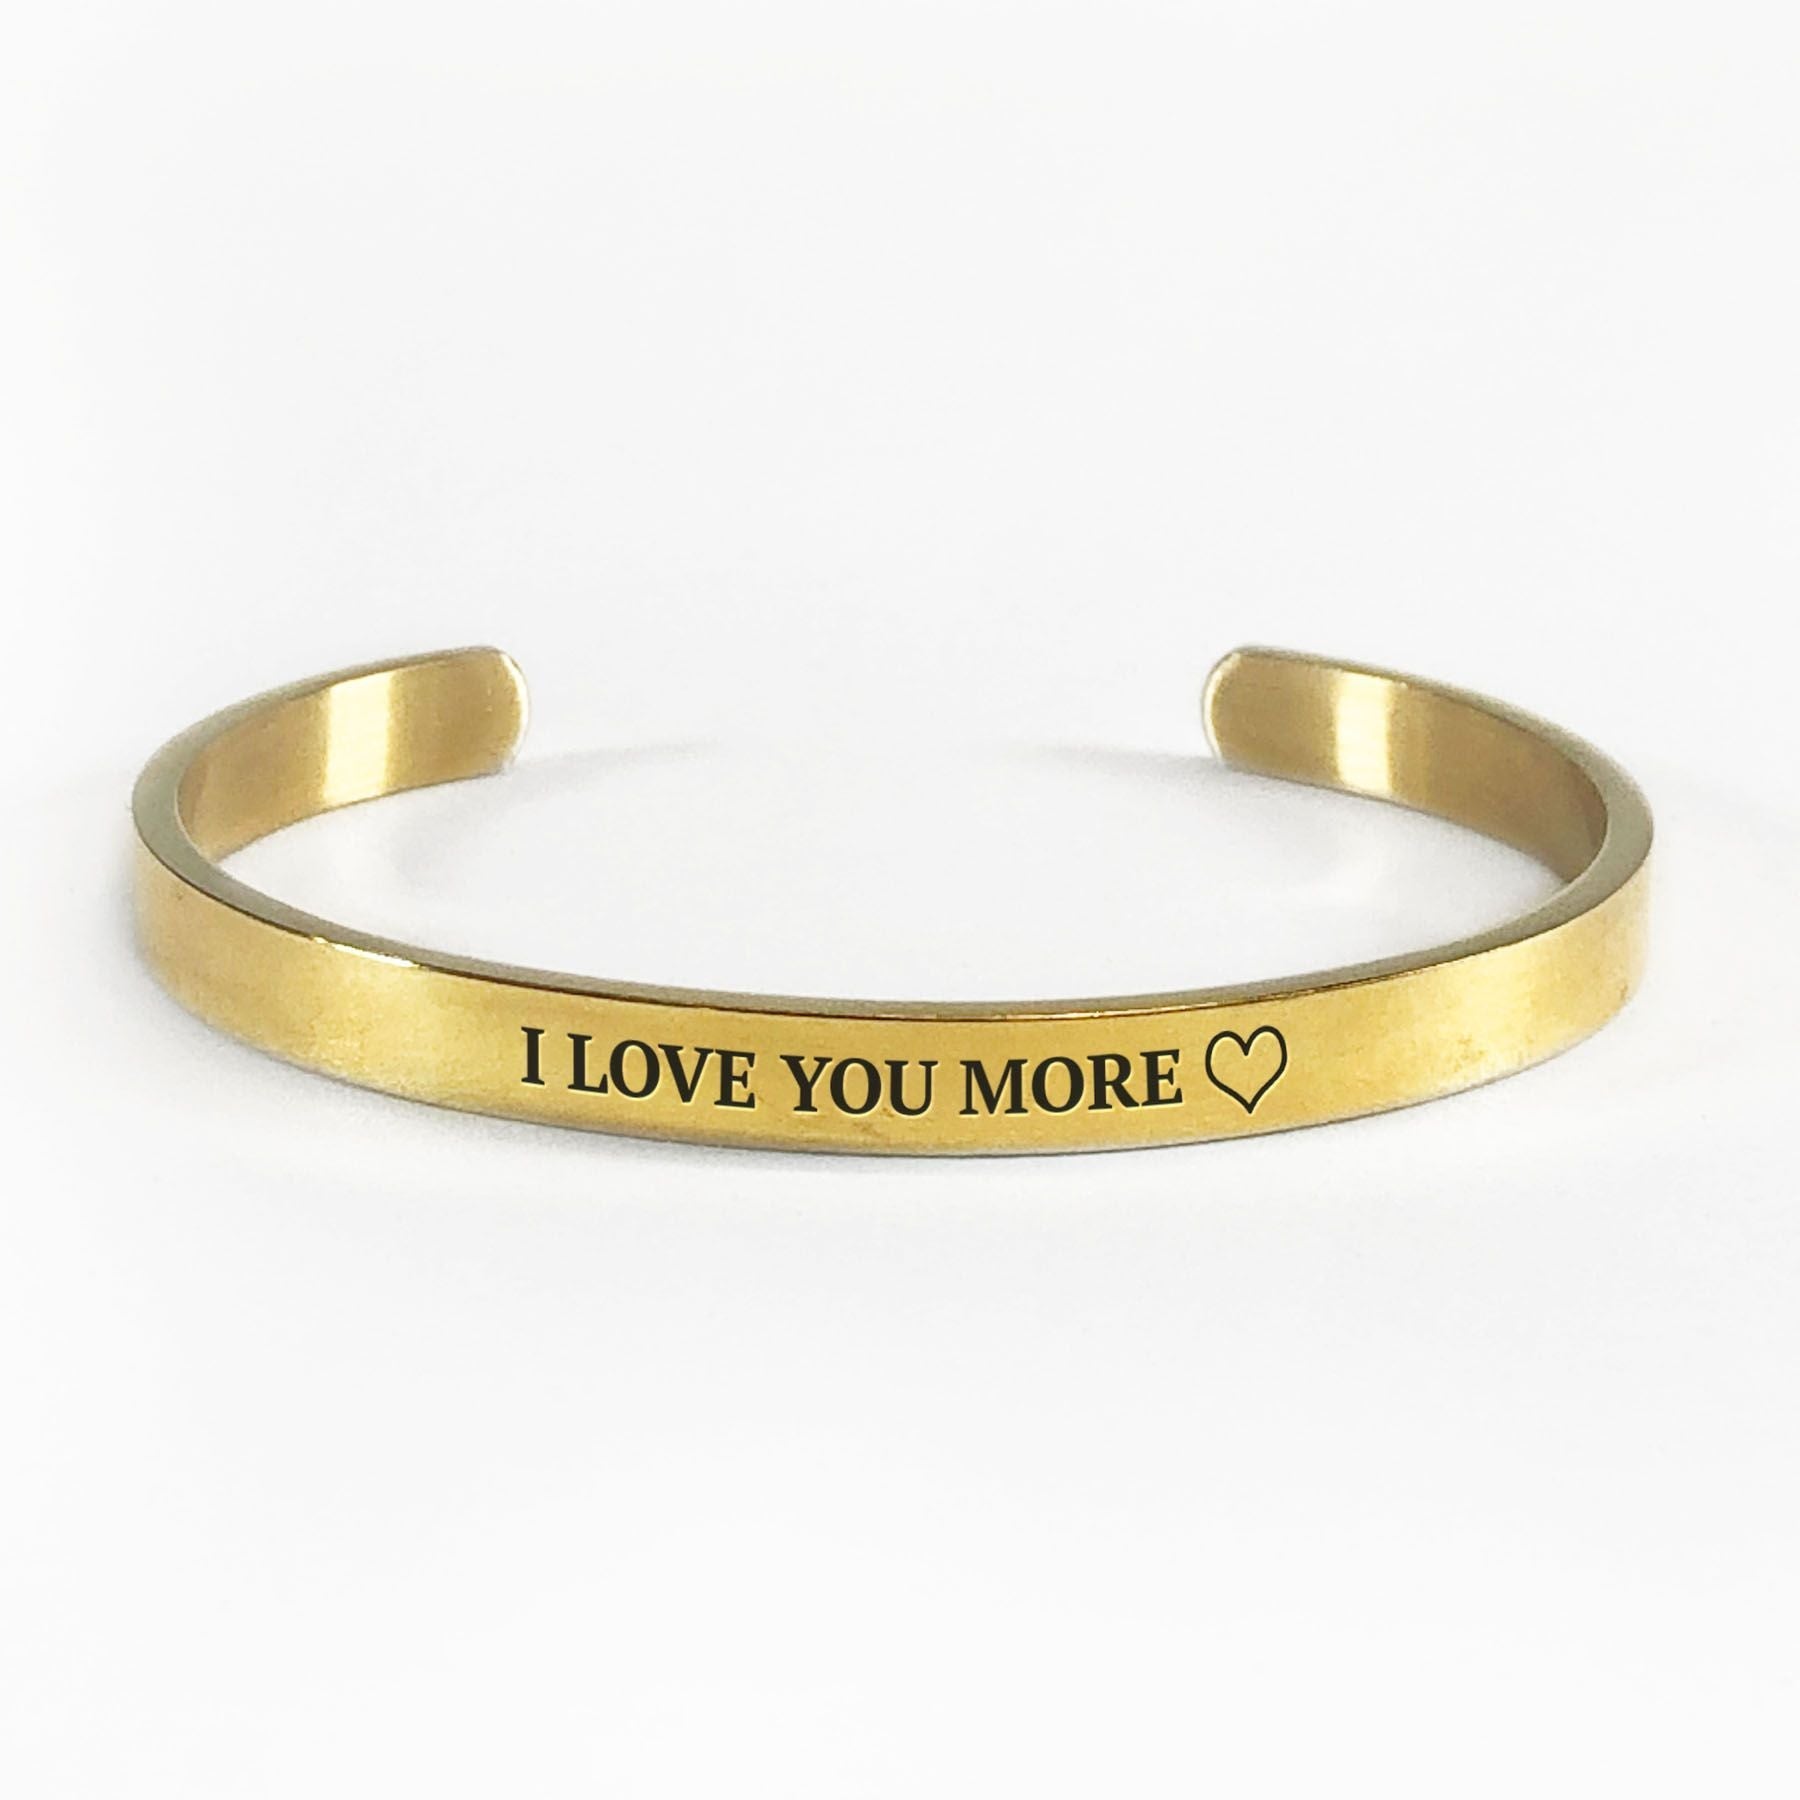 I love you more bracelet with gold plating